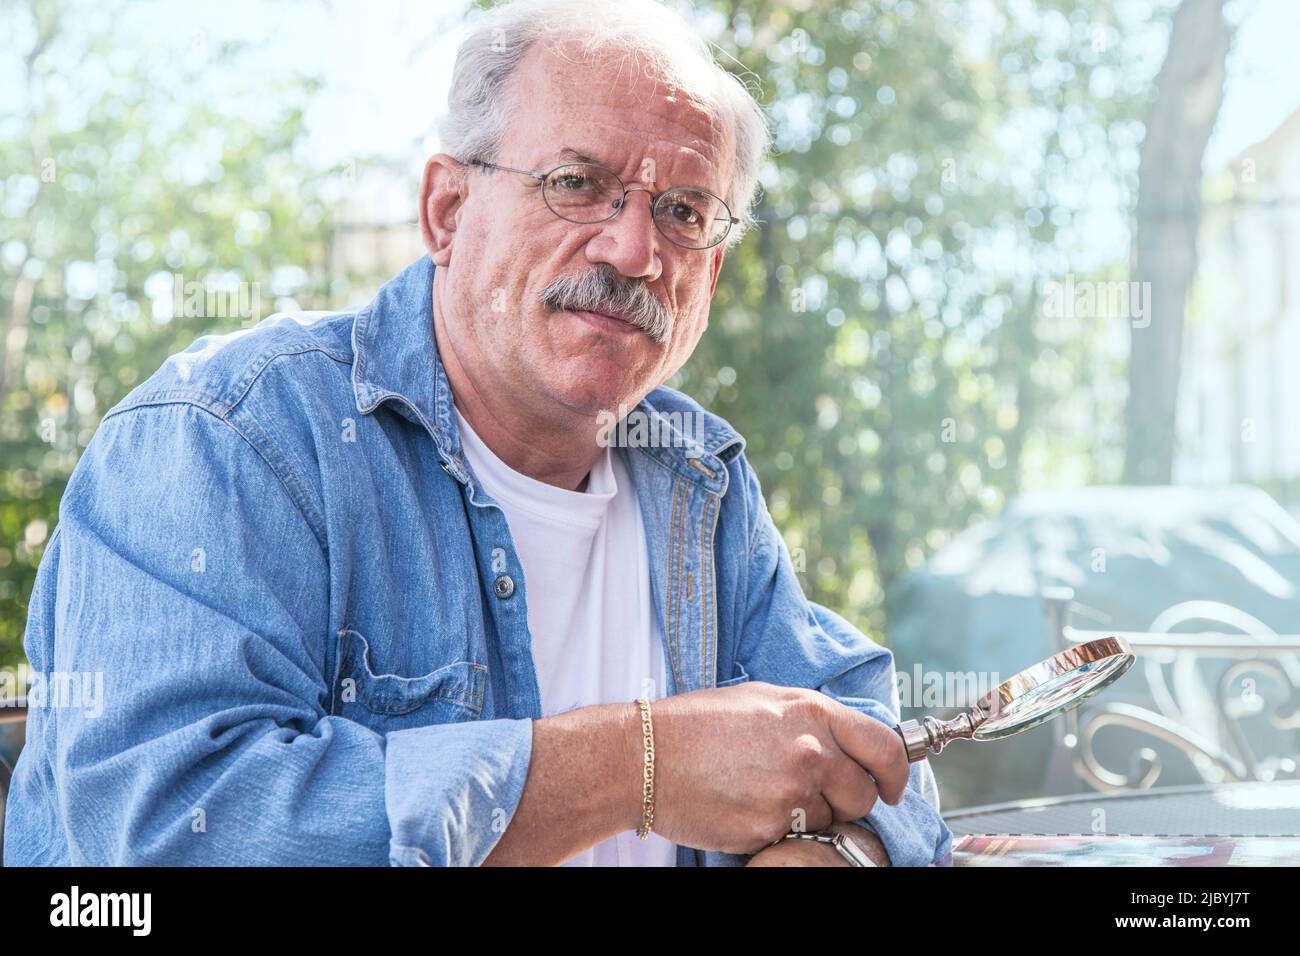 Serious older man holding magnifying glass Stock Photo